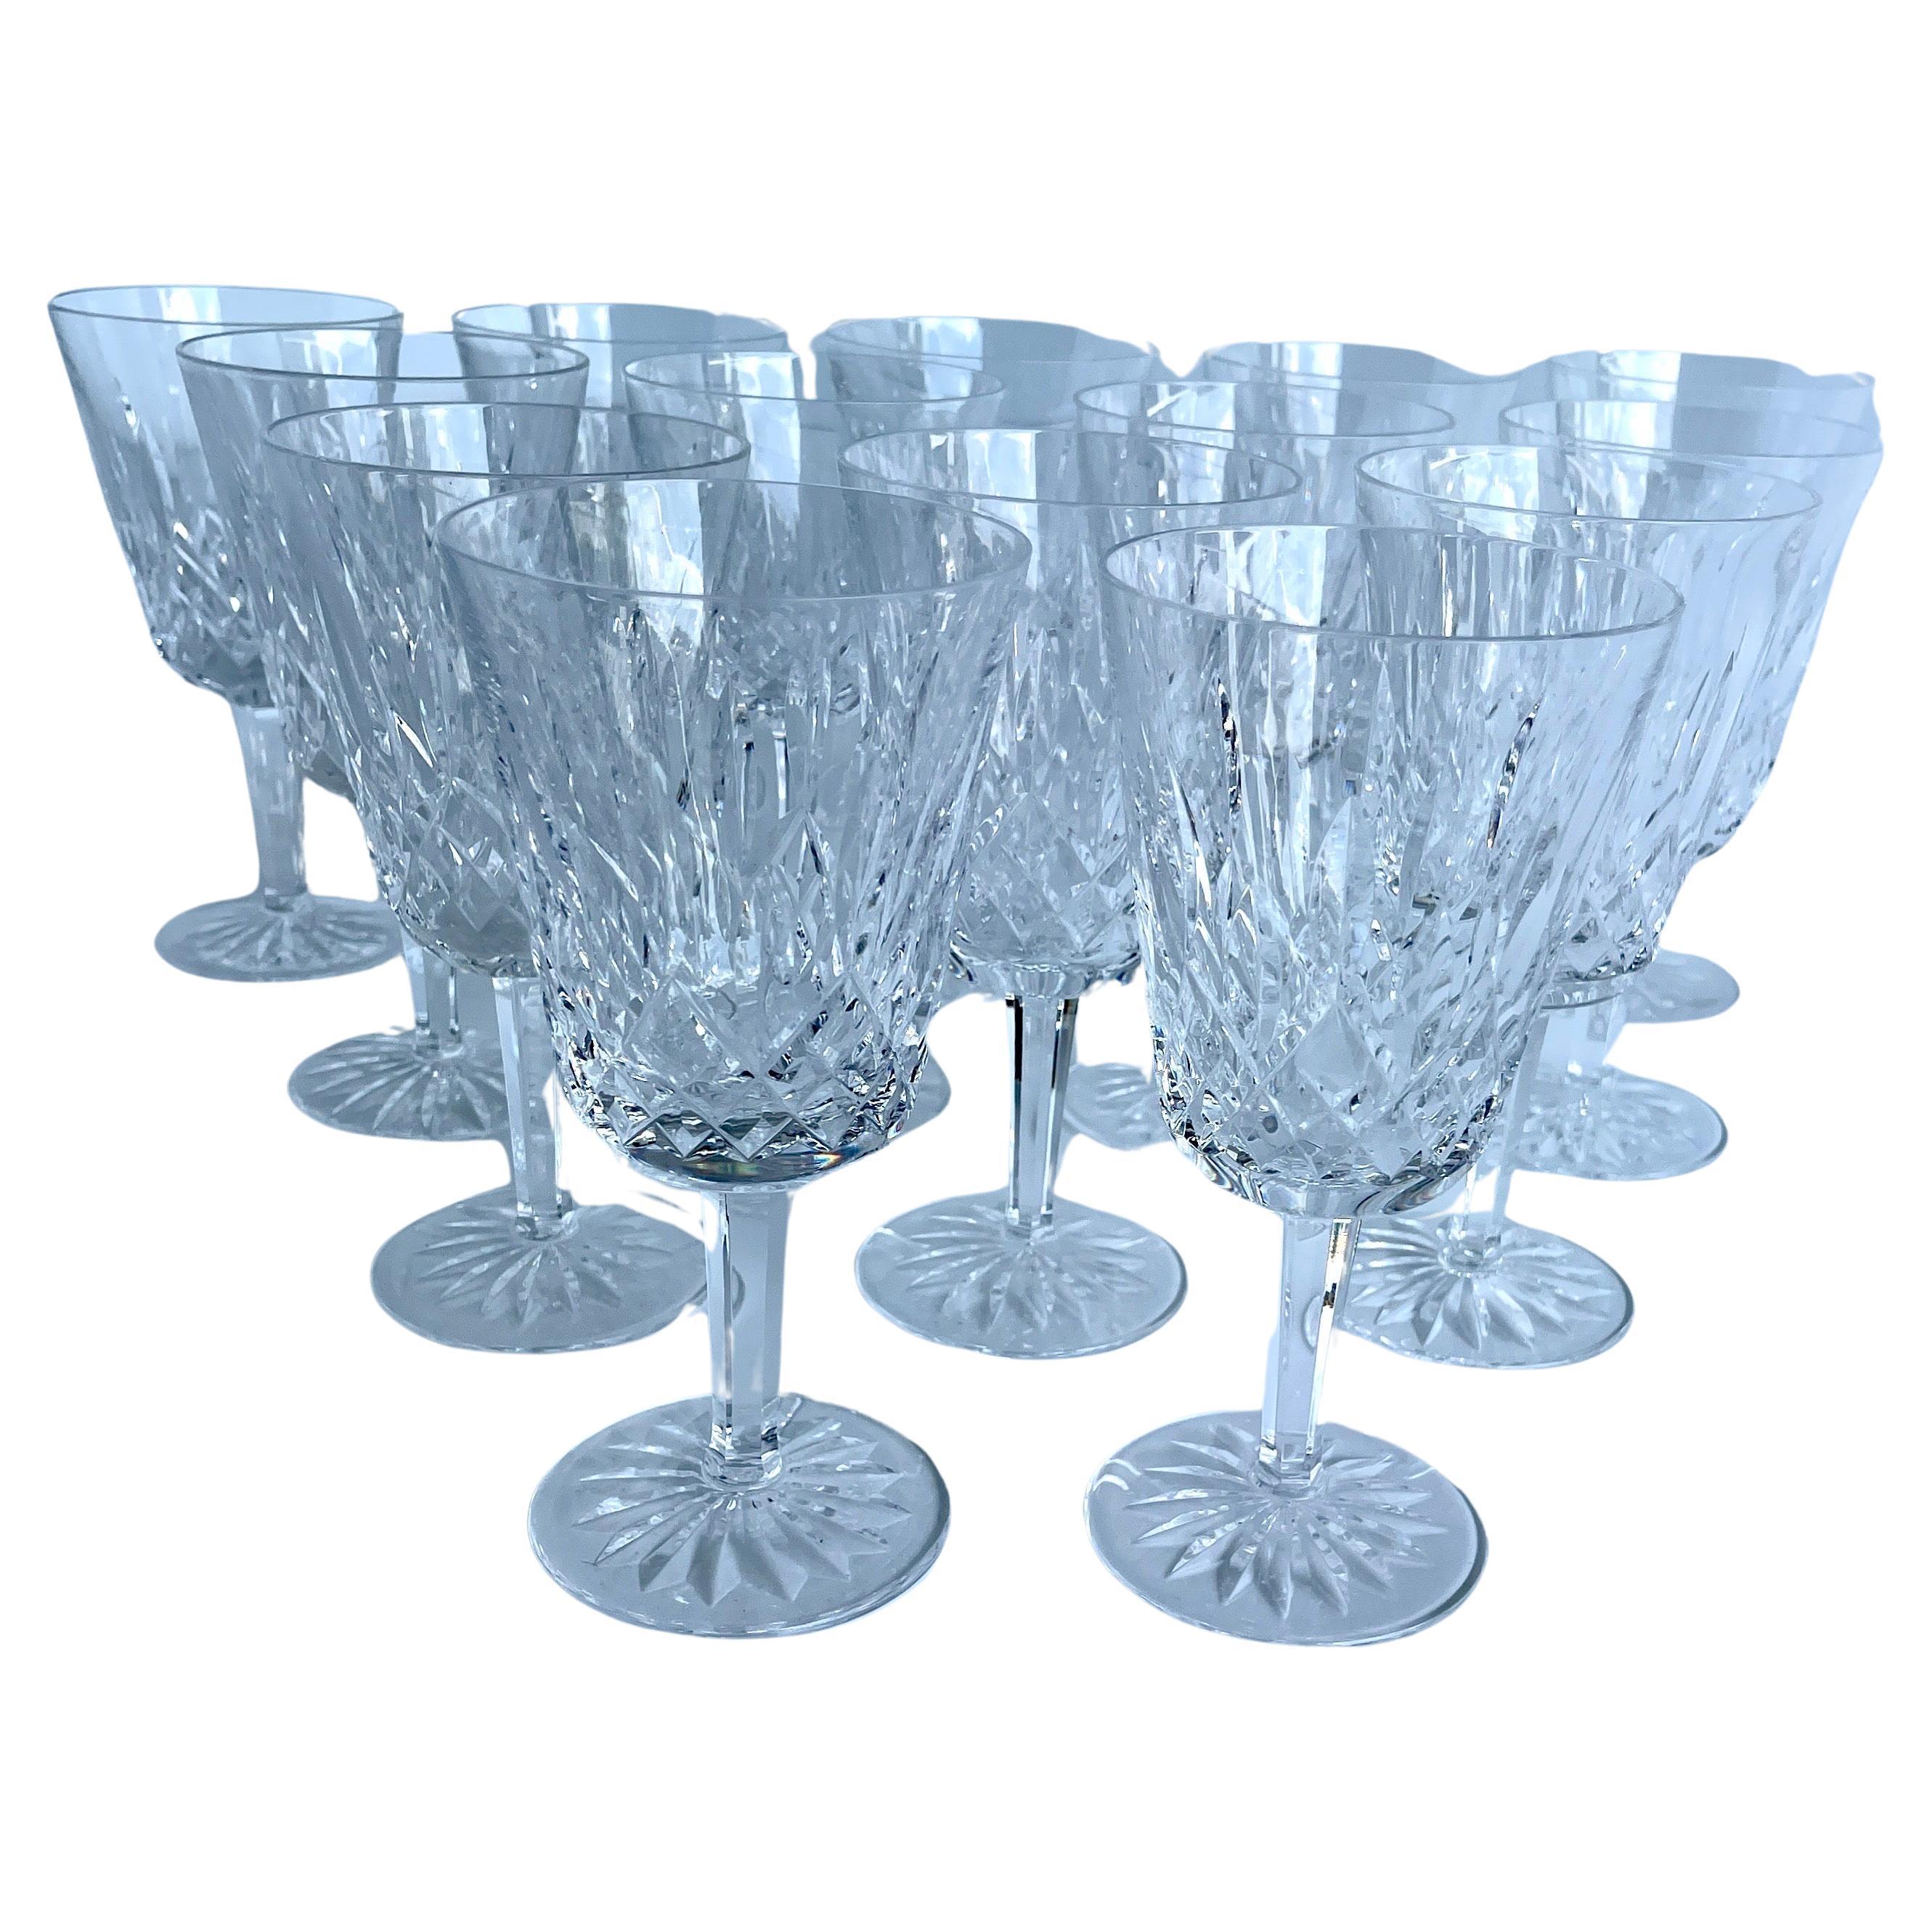 waterford crystal pattern identification